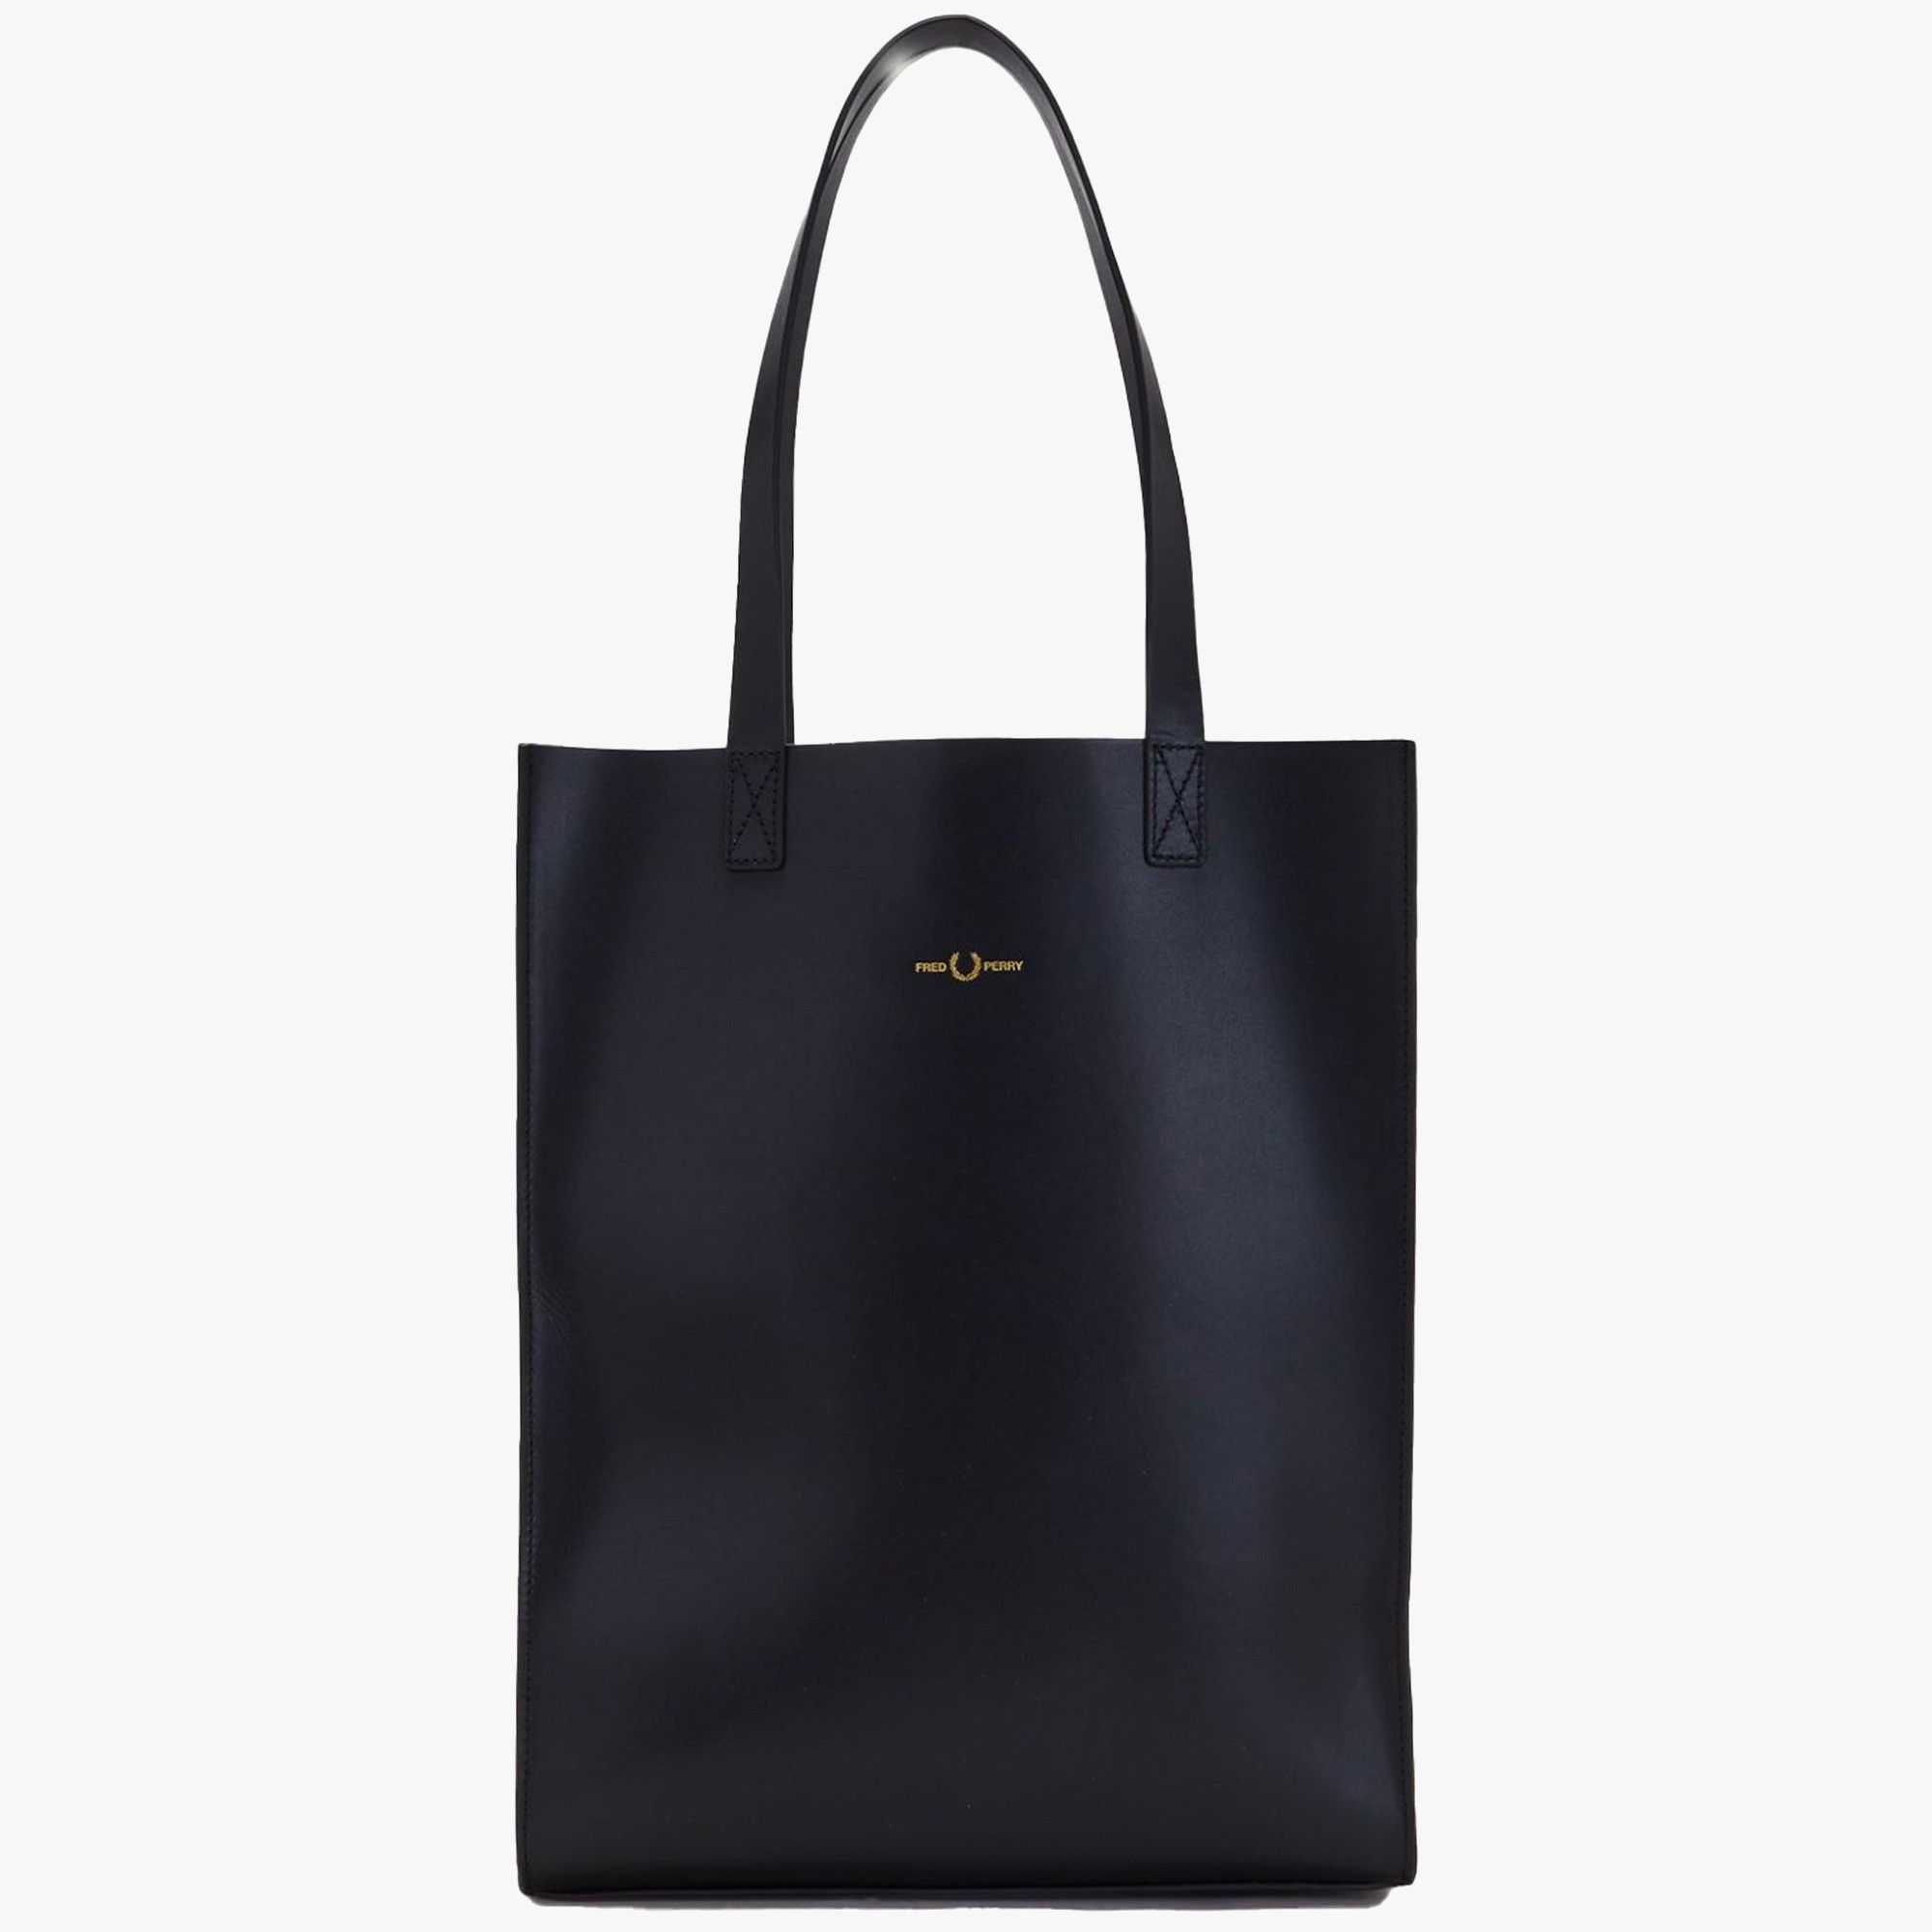 FRED PERRY BURNISHED LEATHER TOTE BAG BLACK